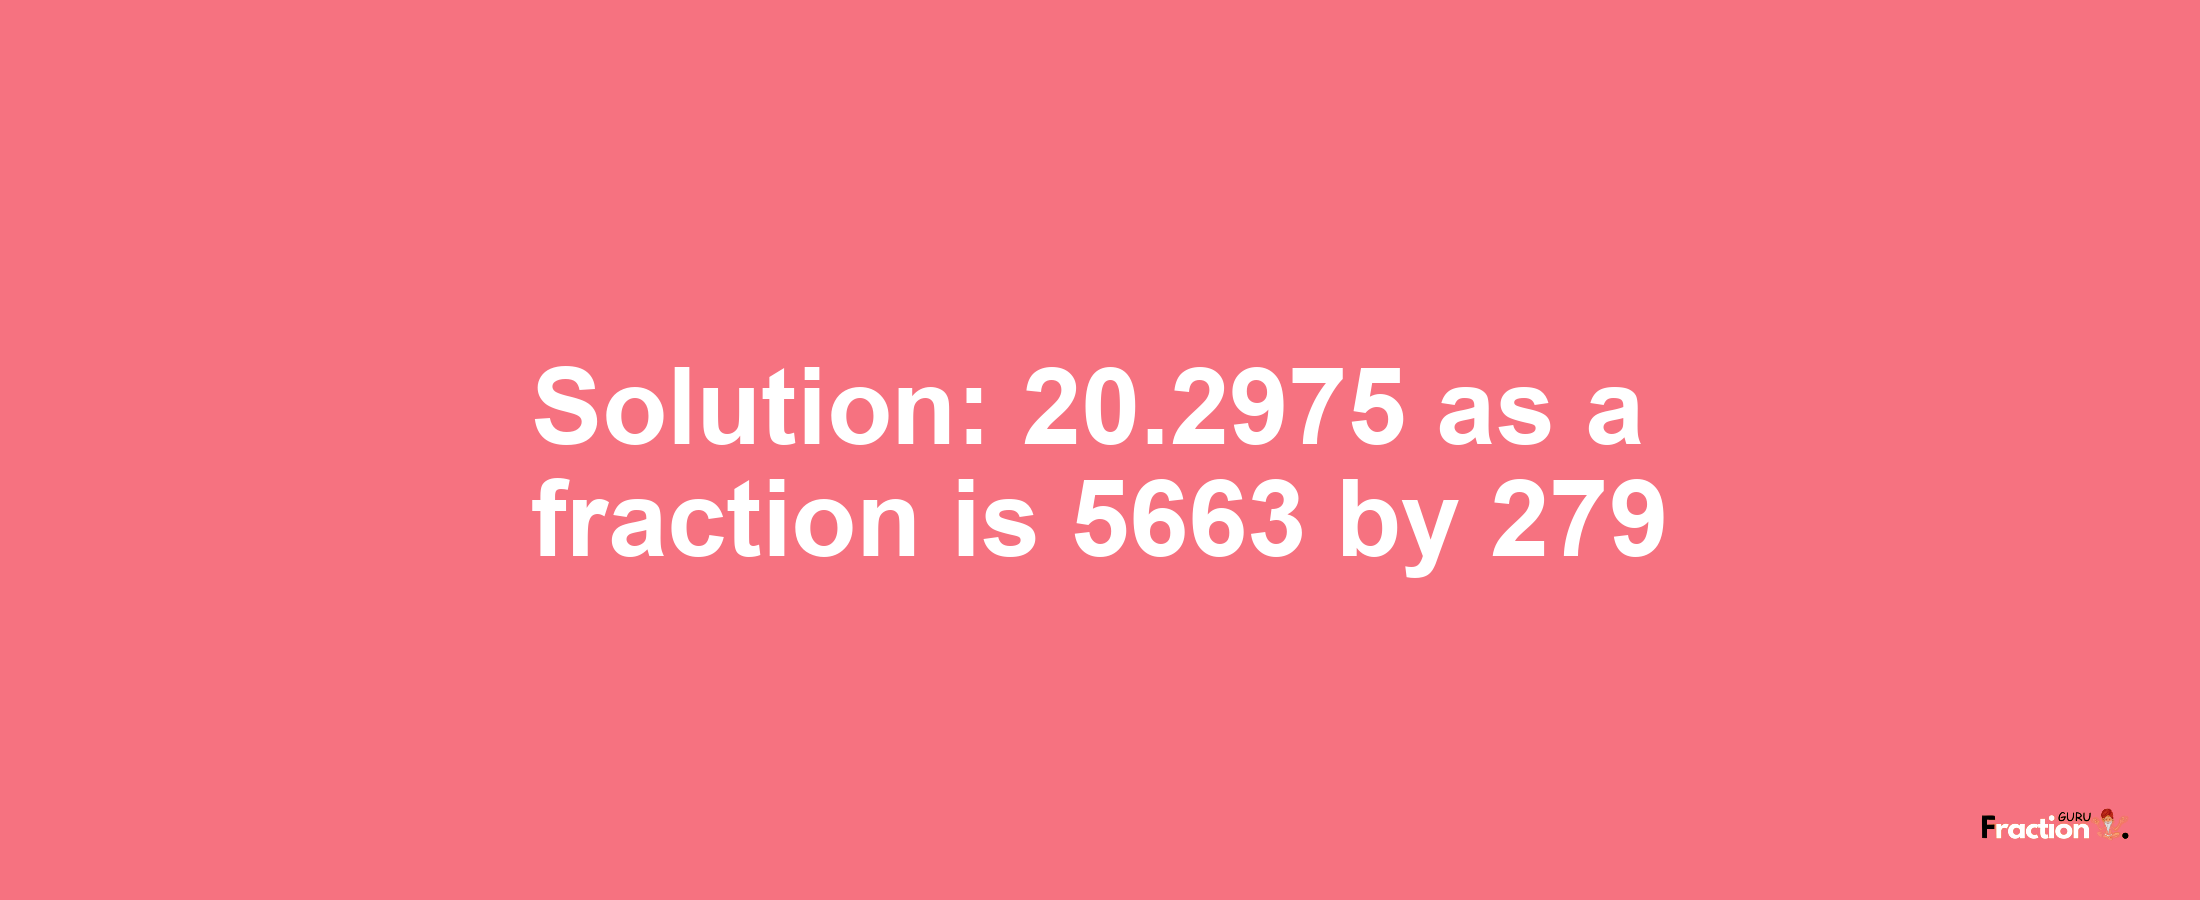 Solution:20.2975 as a fraction is 5663/279